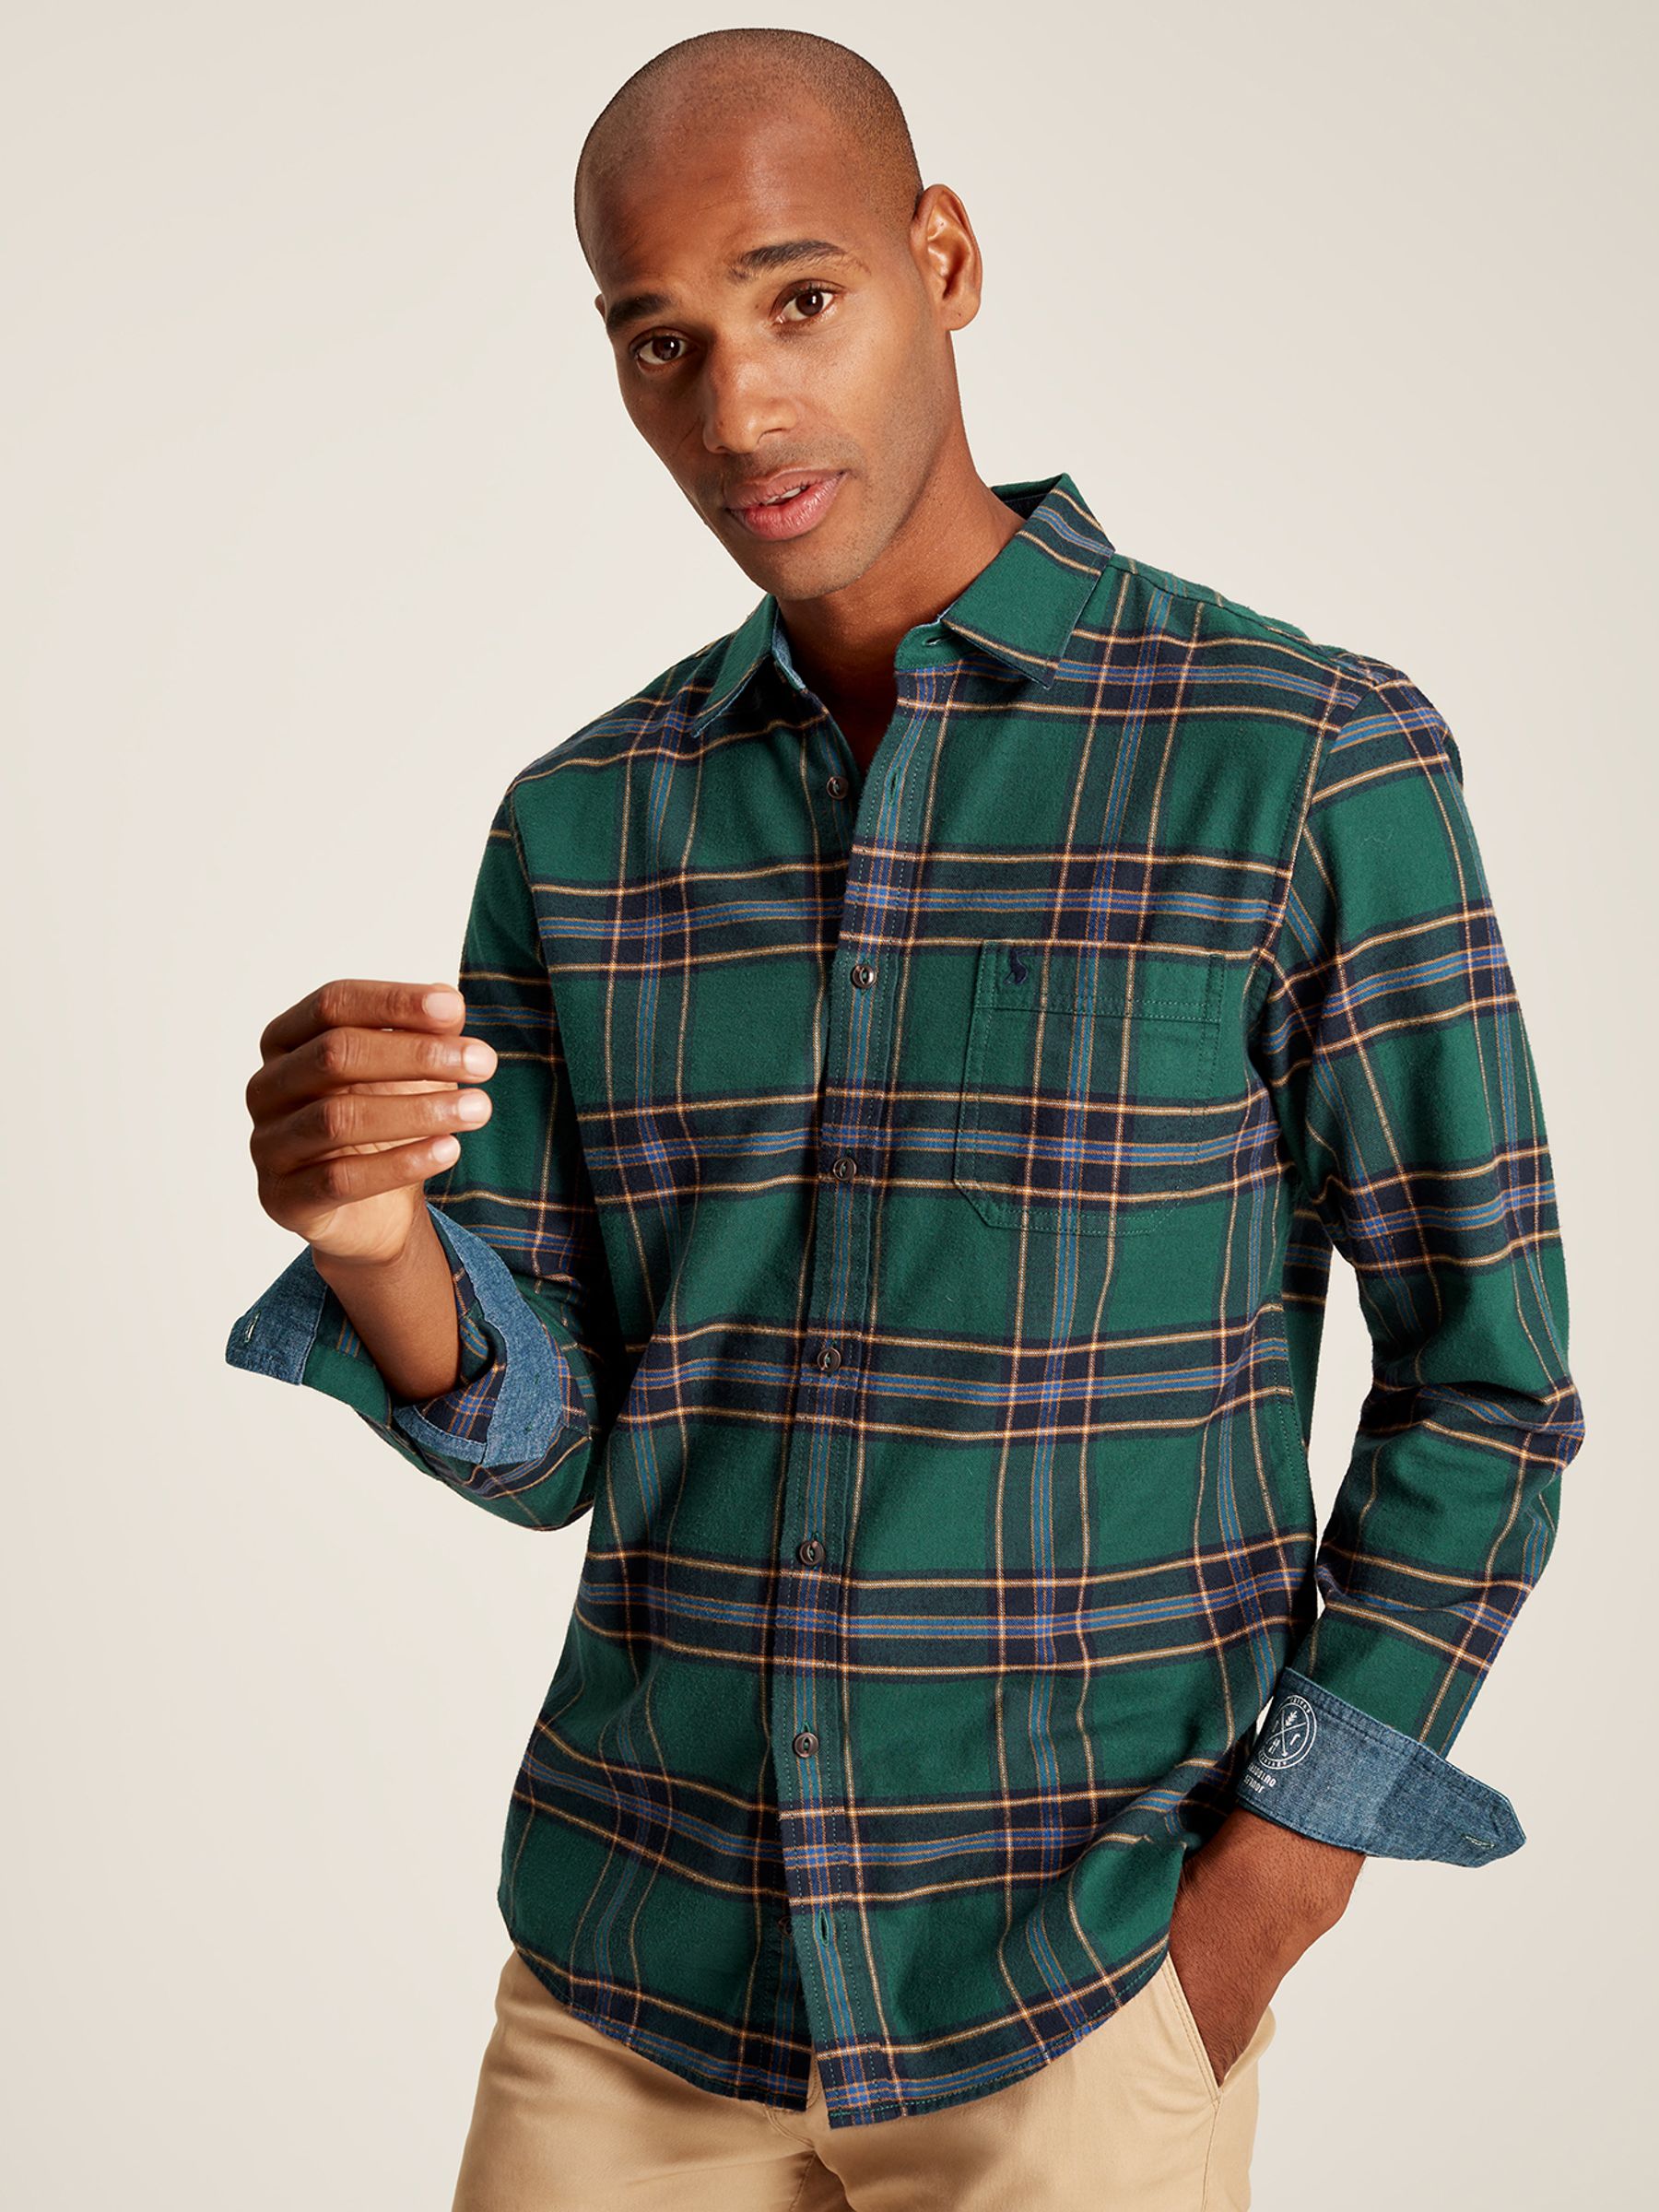 Buy Buchannan Green Cotton Check Shirt from the Joules online shop